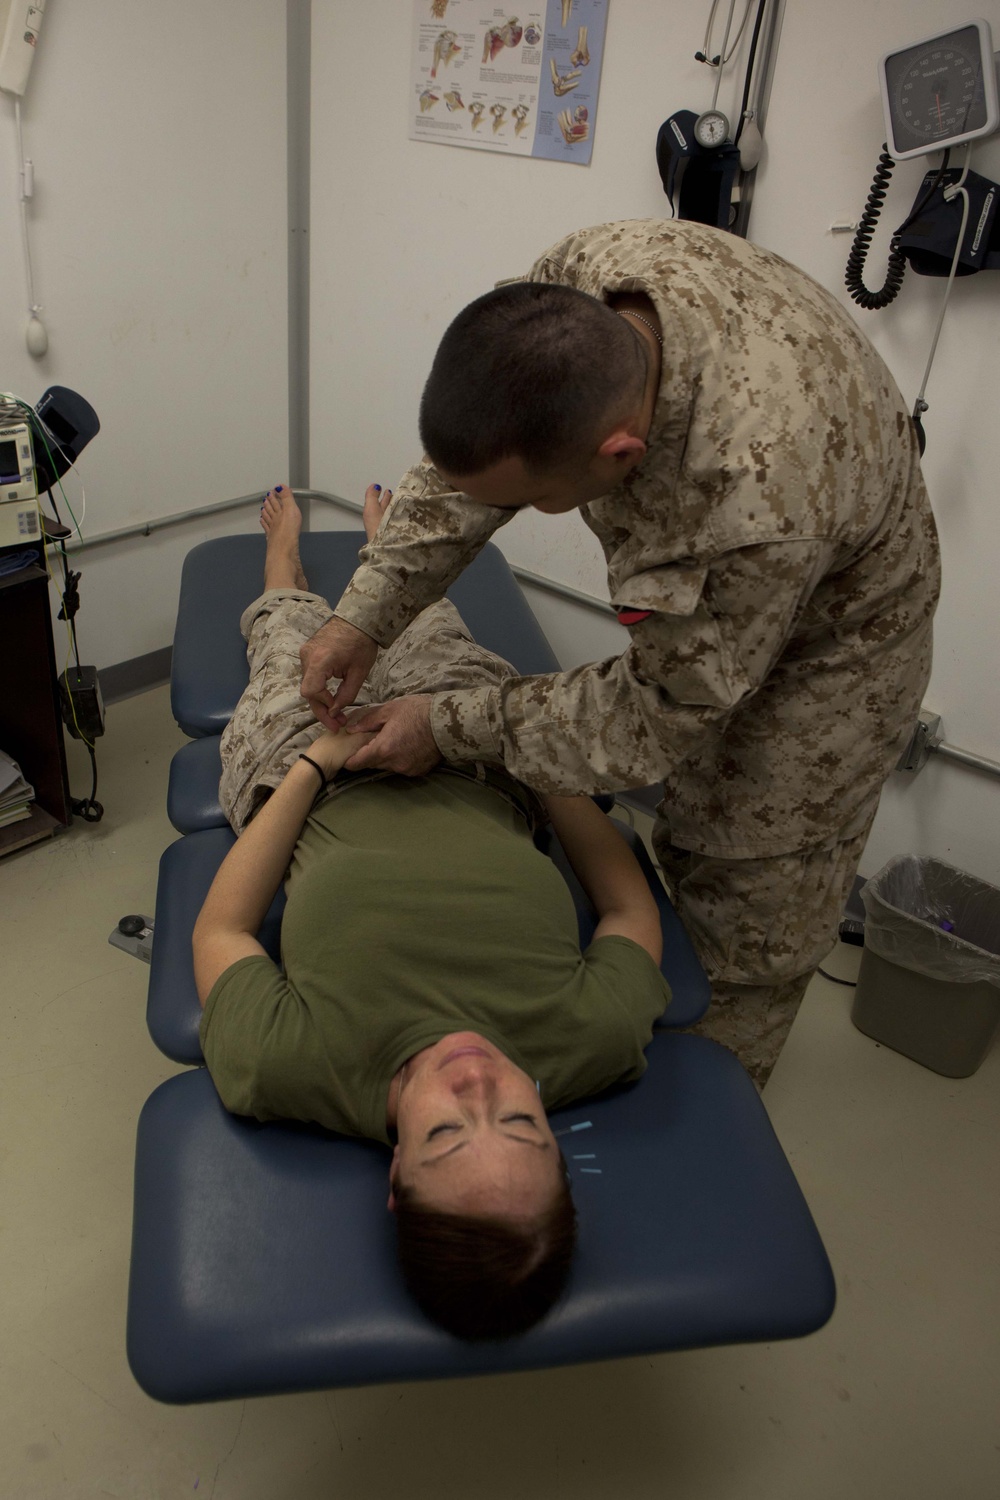 On pins and needles: Navy doctor branches out with deployment medicine